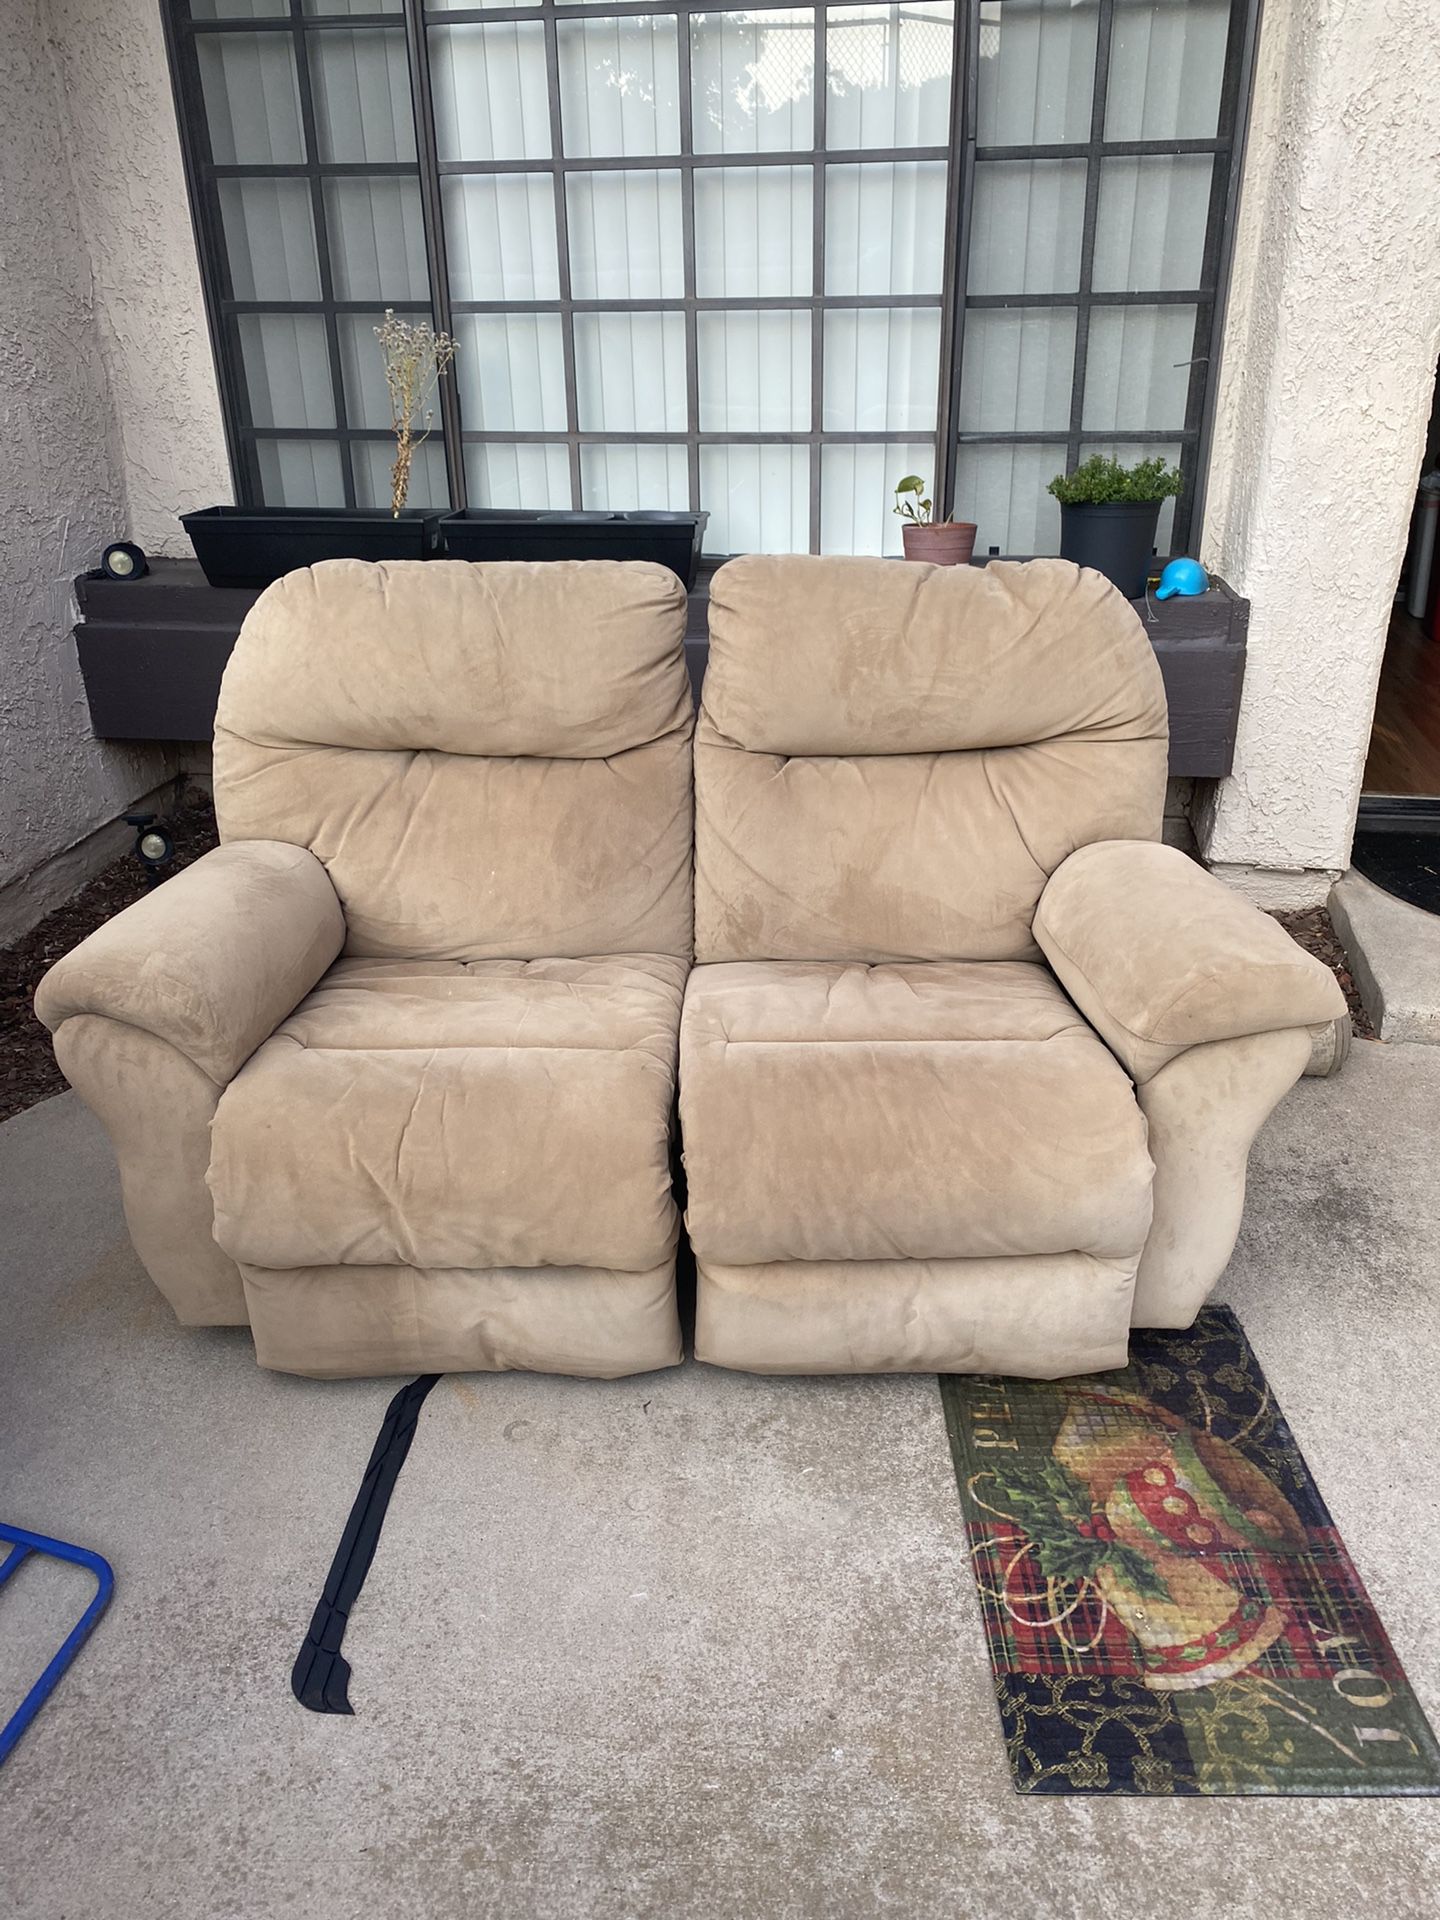 FREE COUCH - Beige 